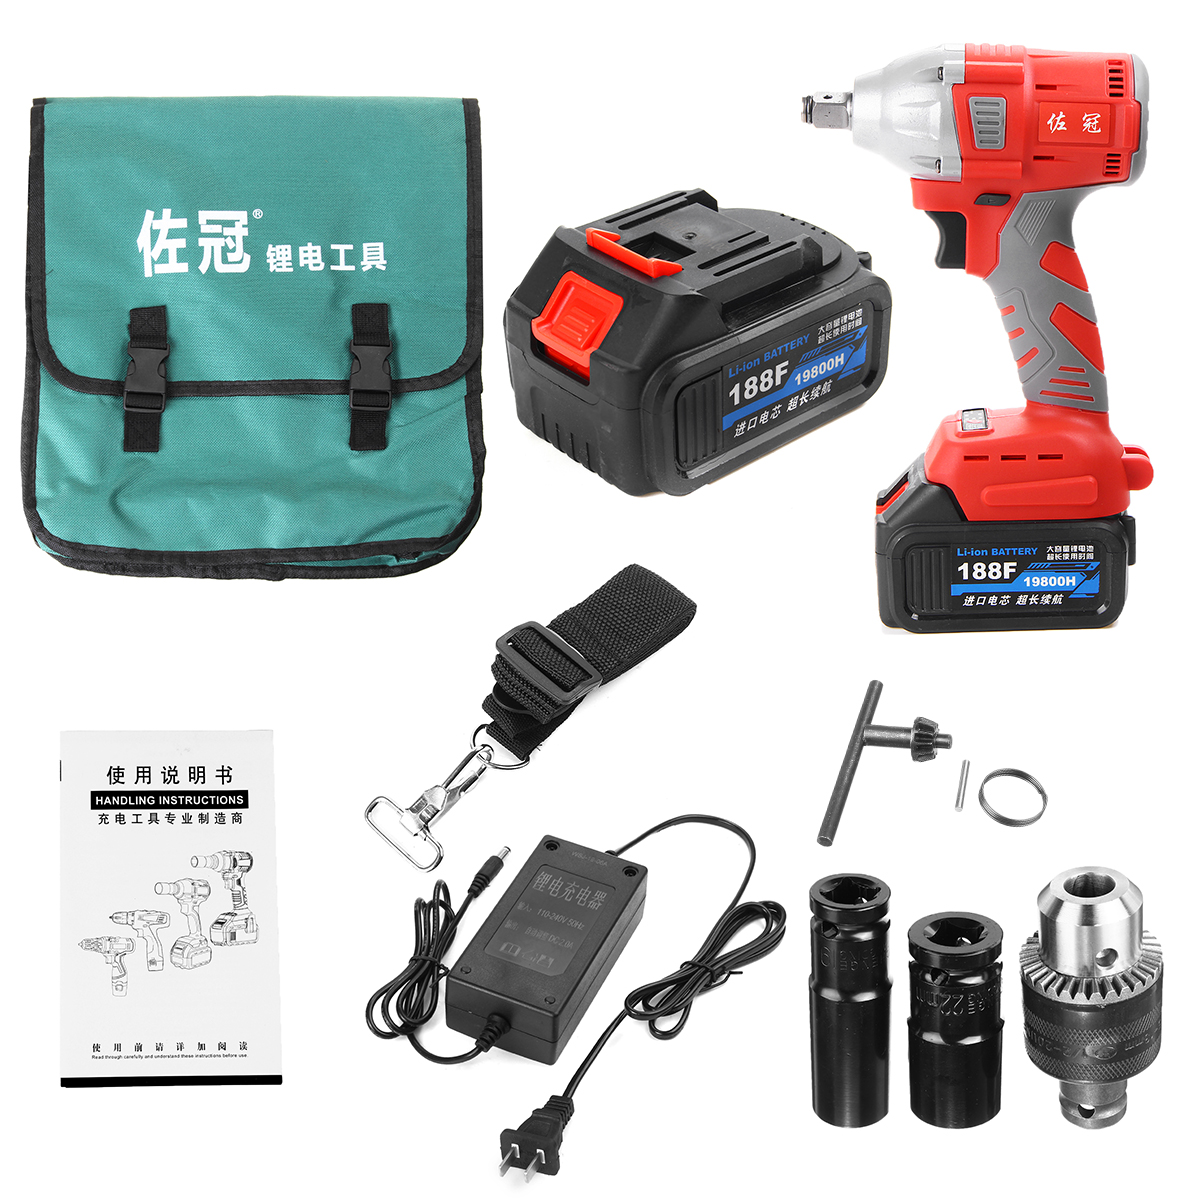 

188F 19800mAh Cordless Electric Impact Wrench Brushless Torque Driver Household Car Repair Tools Kit